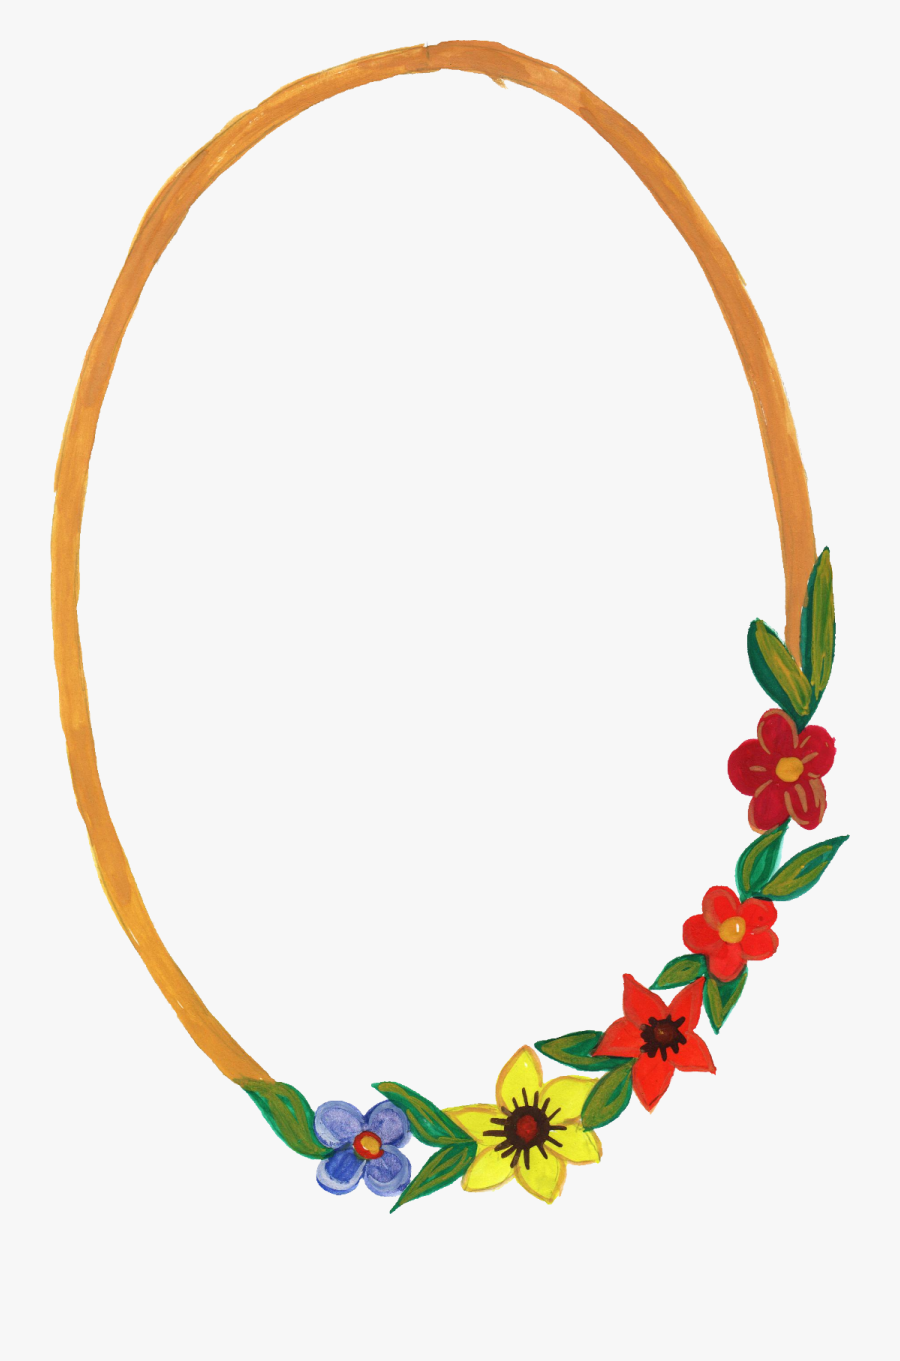 Oval Frame Flowers Png, Transparent Clipart